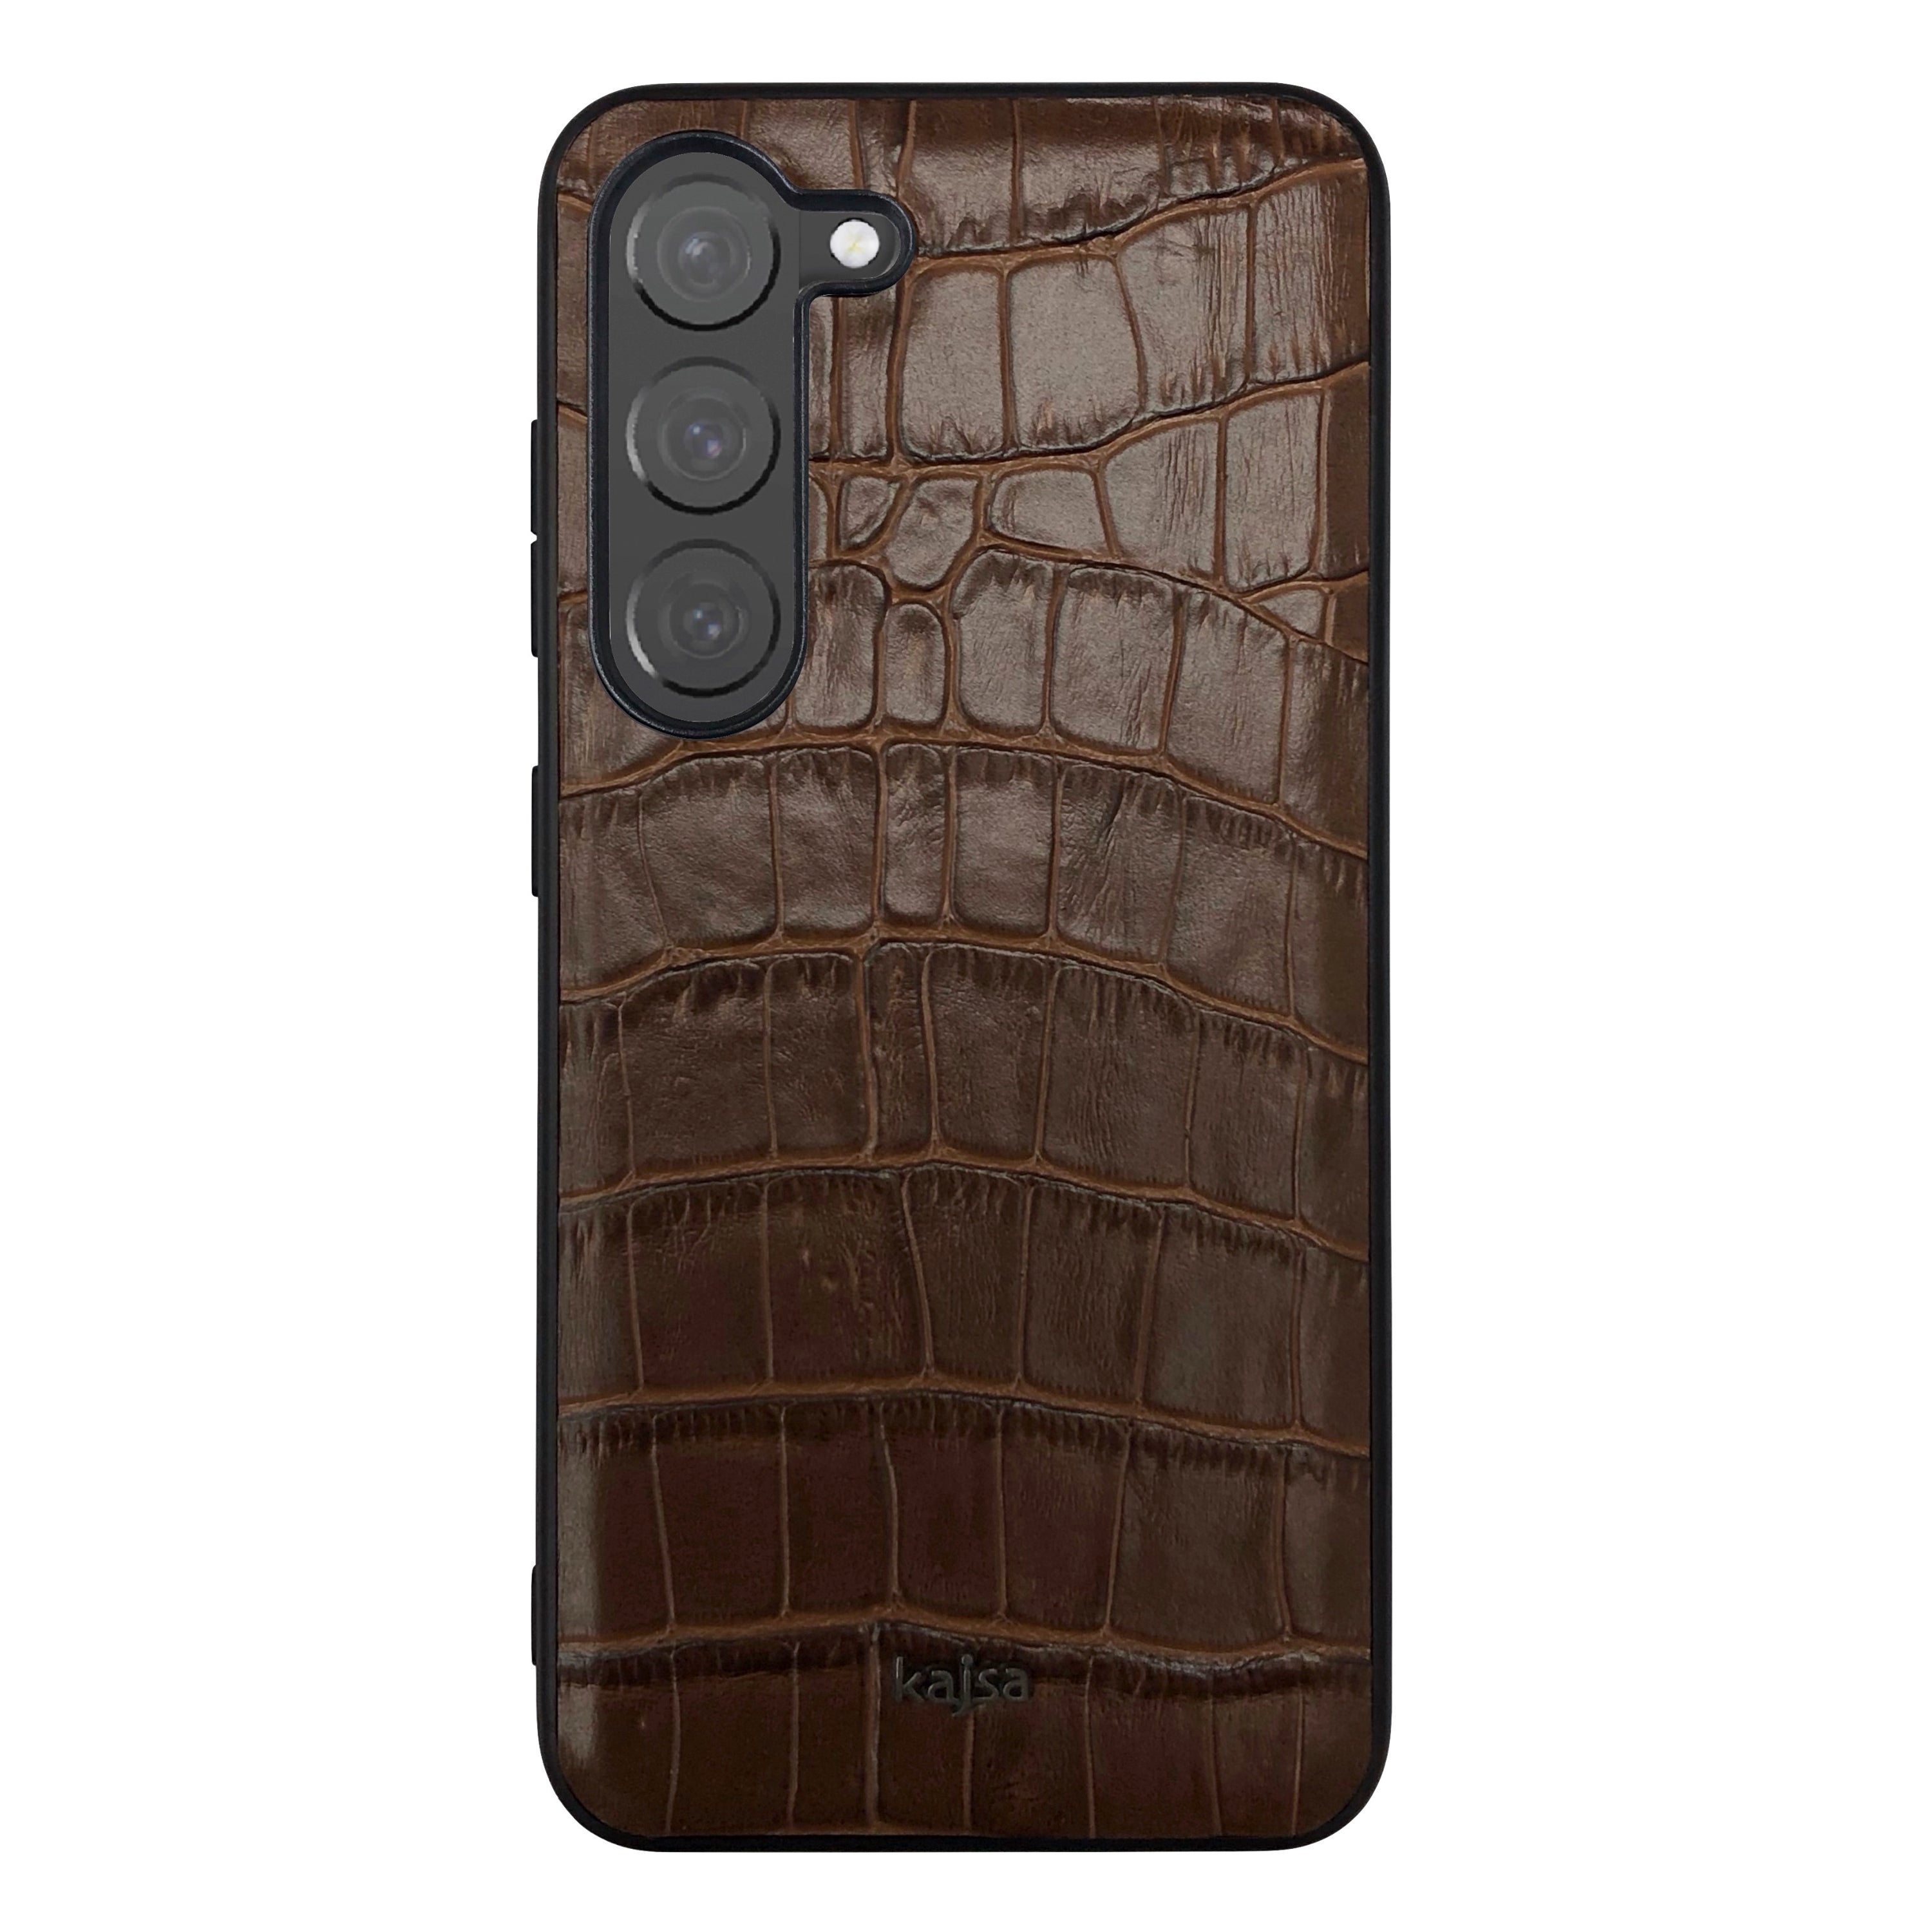 Neo Classic Collection - Genuine Croco Pattern Leather Back Case for Samsung Galaxy S23/S23+/S23 Ultra-Phone Case- phone case - phone cases- phone cover- iphone cover- iphone case- iphone cases- leather case- leather cases- DIYCASE - custom case - leather cover - hand strap case - croco pattern case - snake pattern case - carbon fiber phone case - phone case brand - unique phone case - high quality - phone case brand - protective case - buy phone case hong kong - online buy phone case - iphone‎手機殼 - 客製化手機殼 